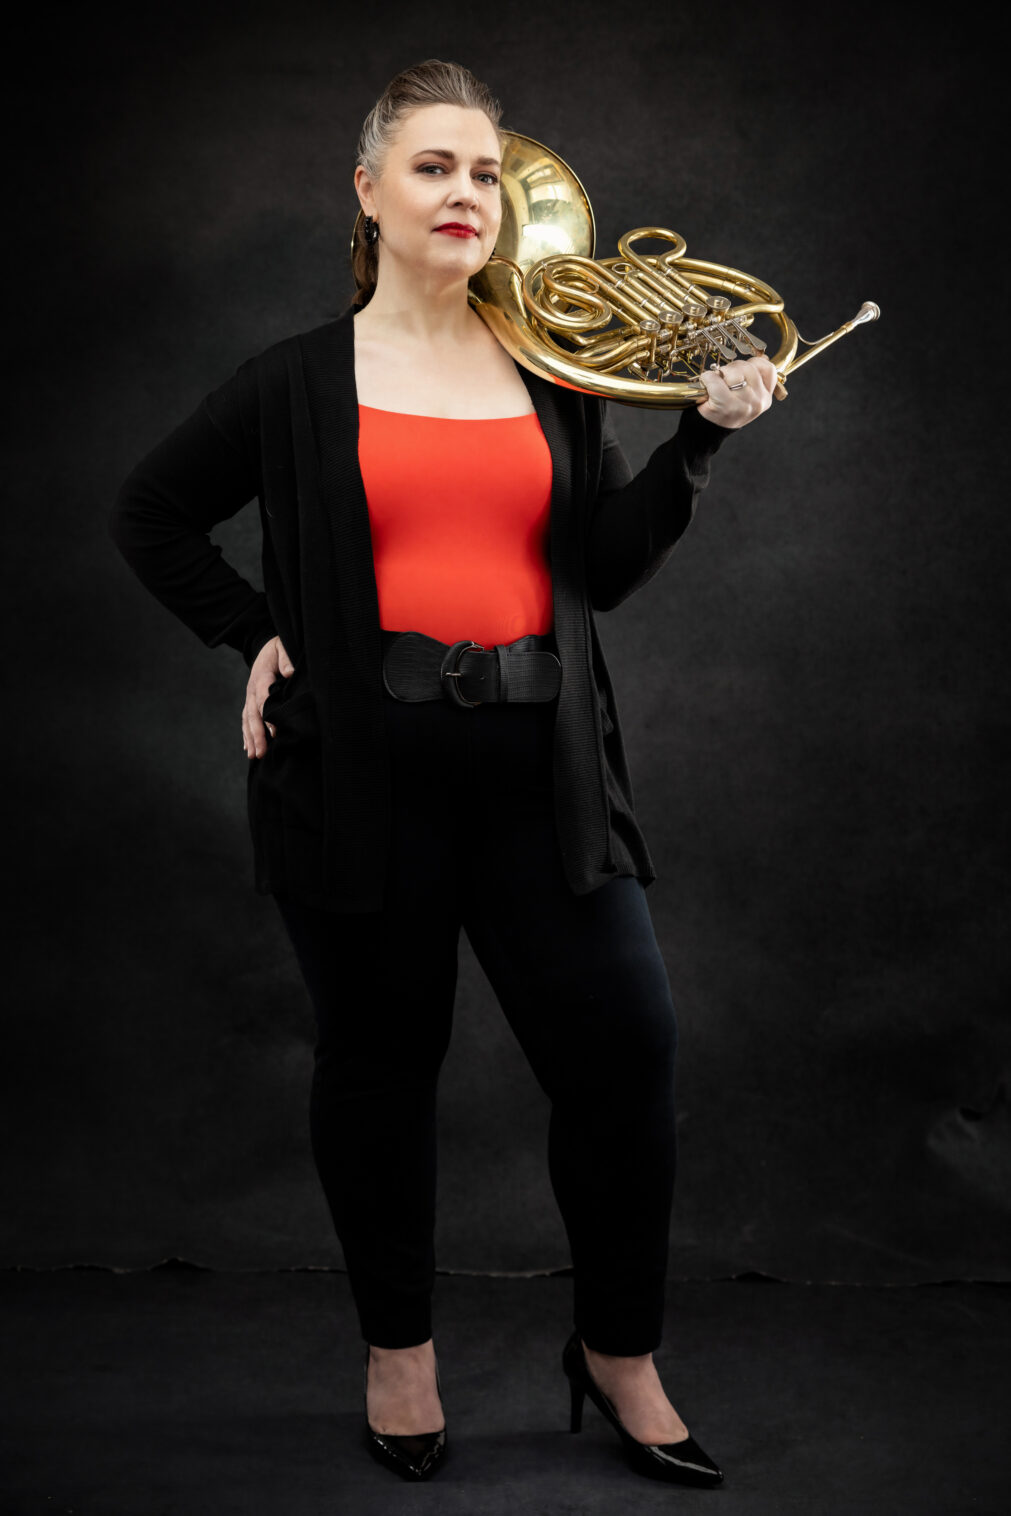 Chicago french horn player headshot portraits